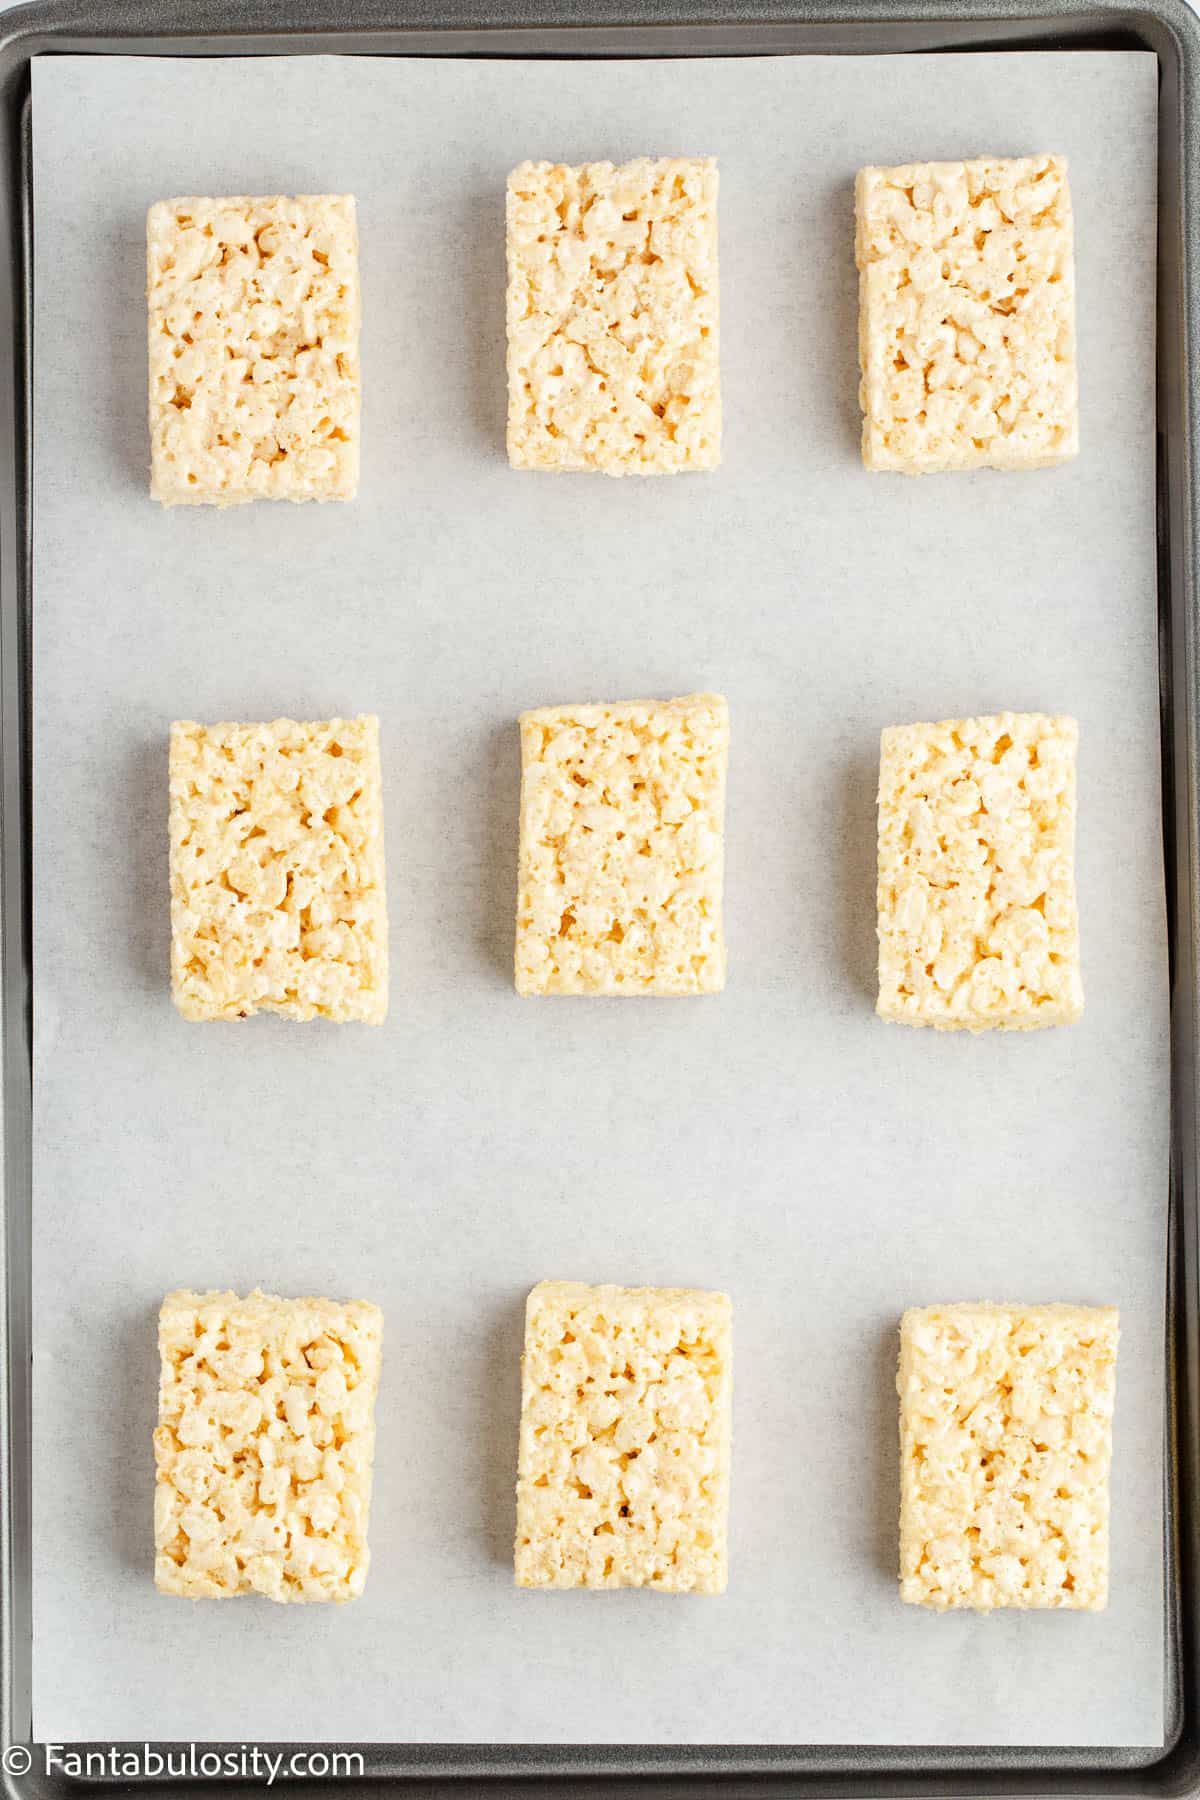 Nine unwrapped rice krispie treats are arranged on a parchment lined baking sheet